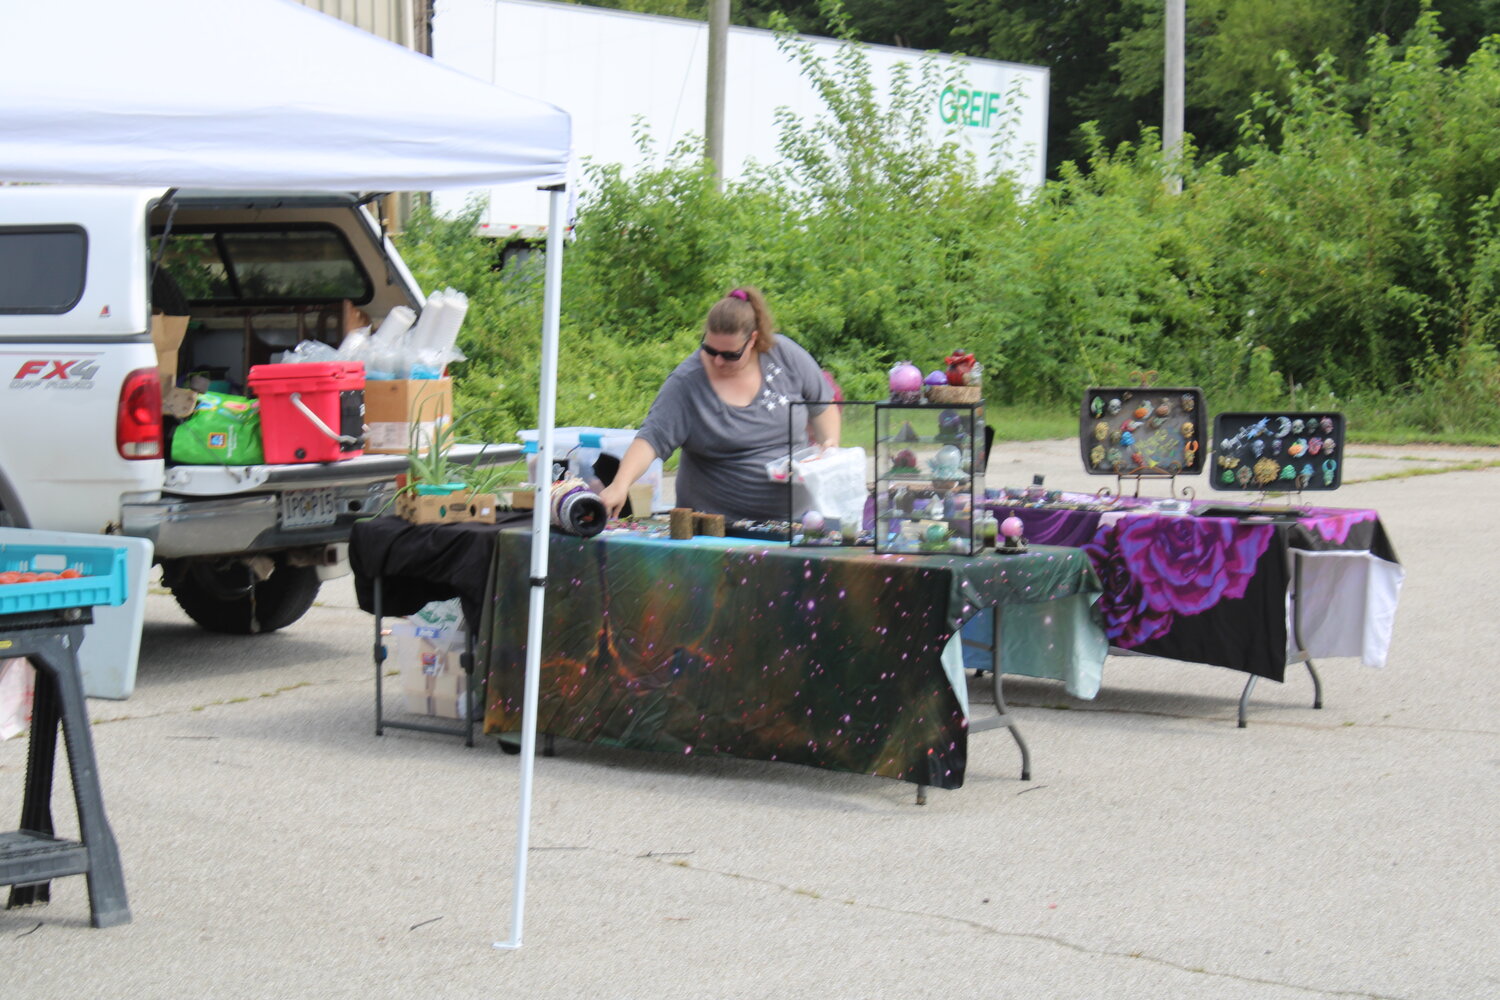 A vendor sets up her booth at the Wright City market on Aug. 3.